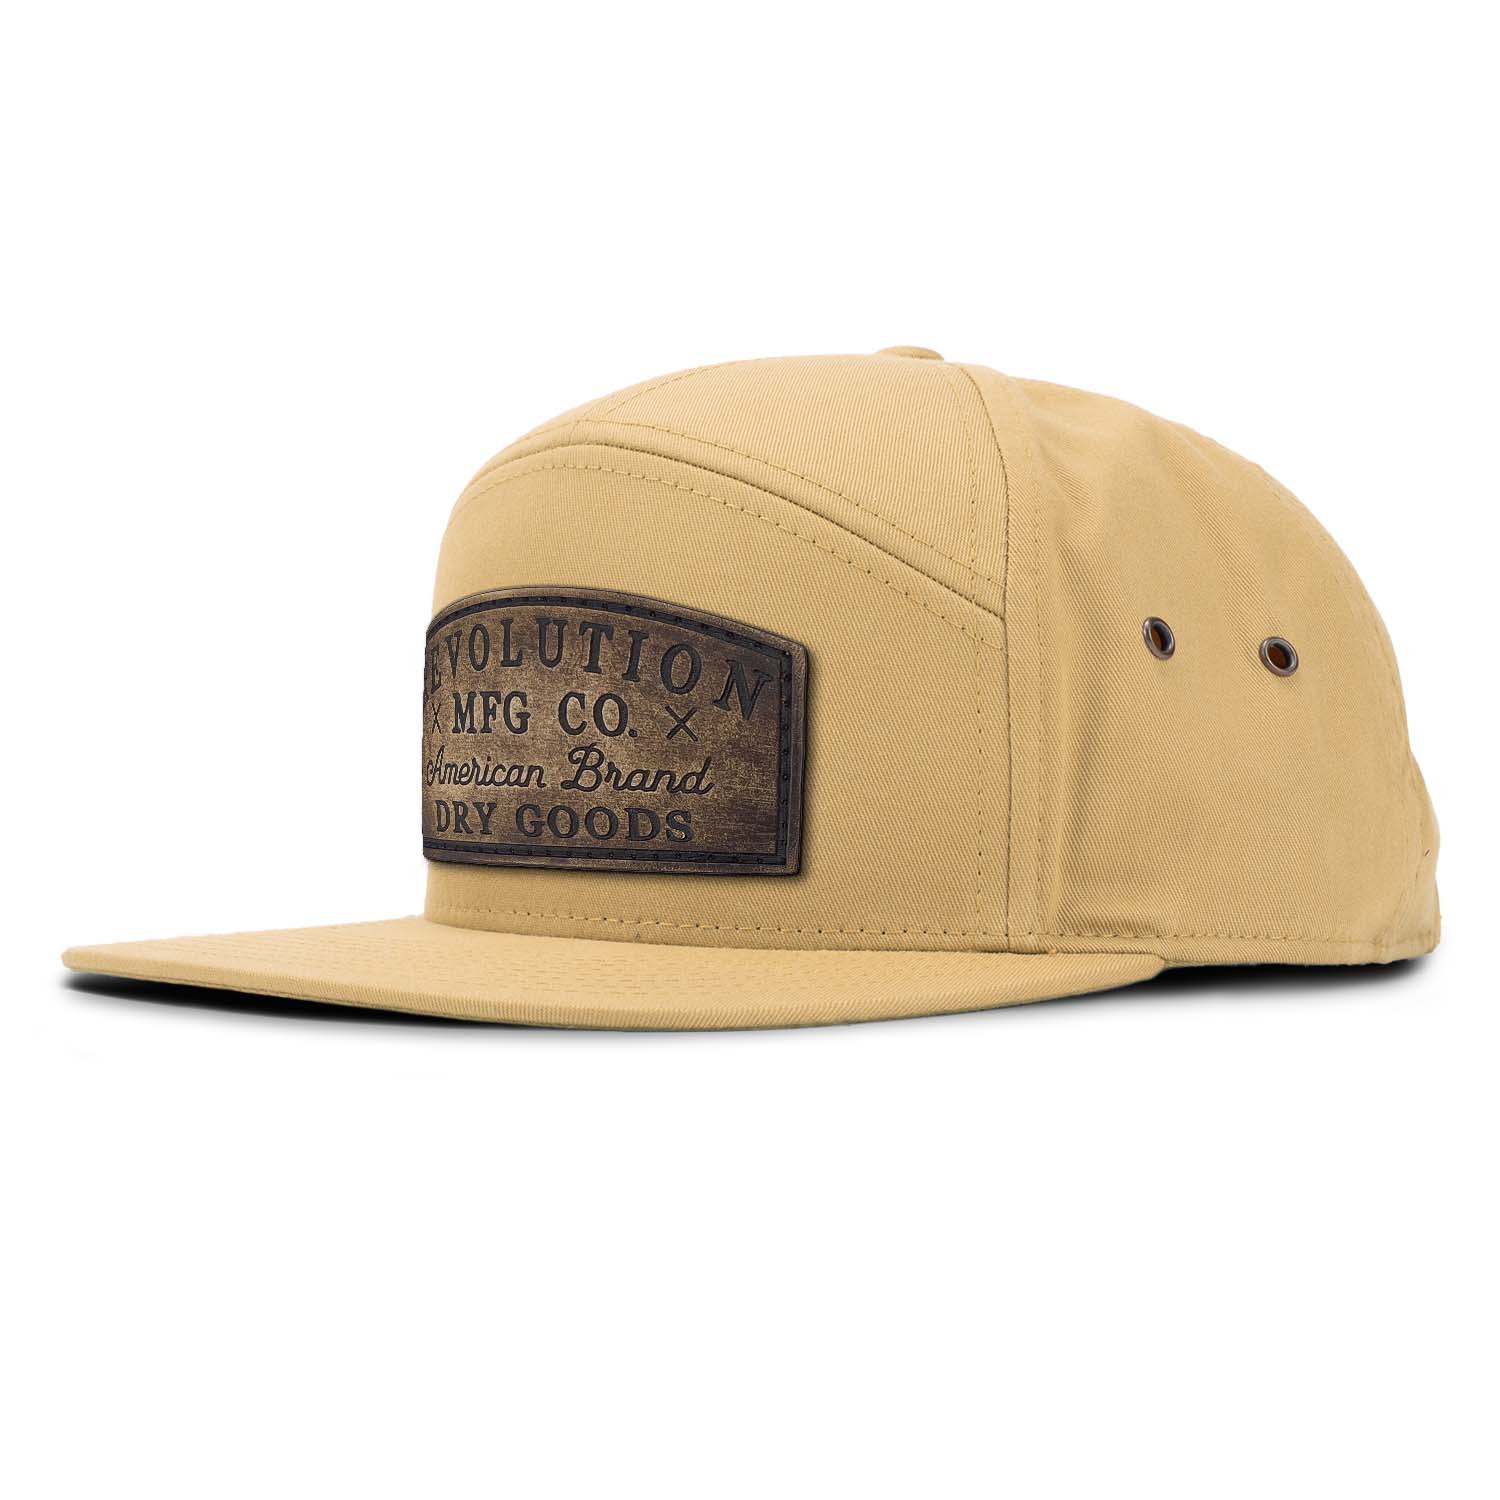 A biscuit tan 7 panel style hat featuring an adjustable leather strapback with brass clasp closure and brass eyelets with our full grain leather vintage Dry Goods patch on the seamless front panel